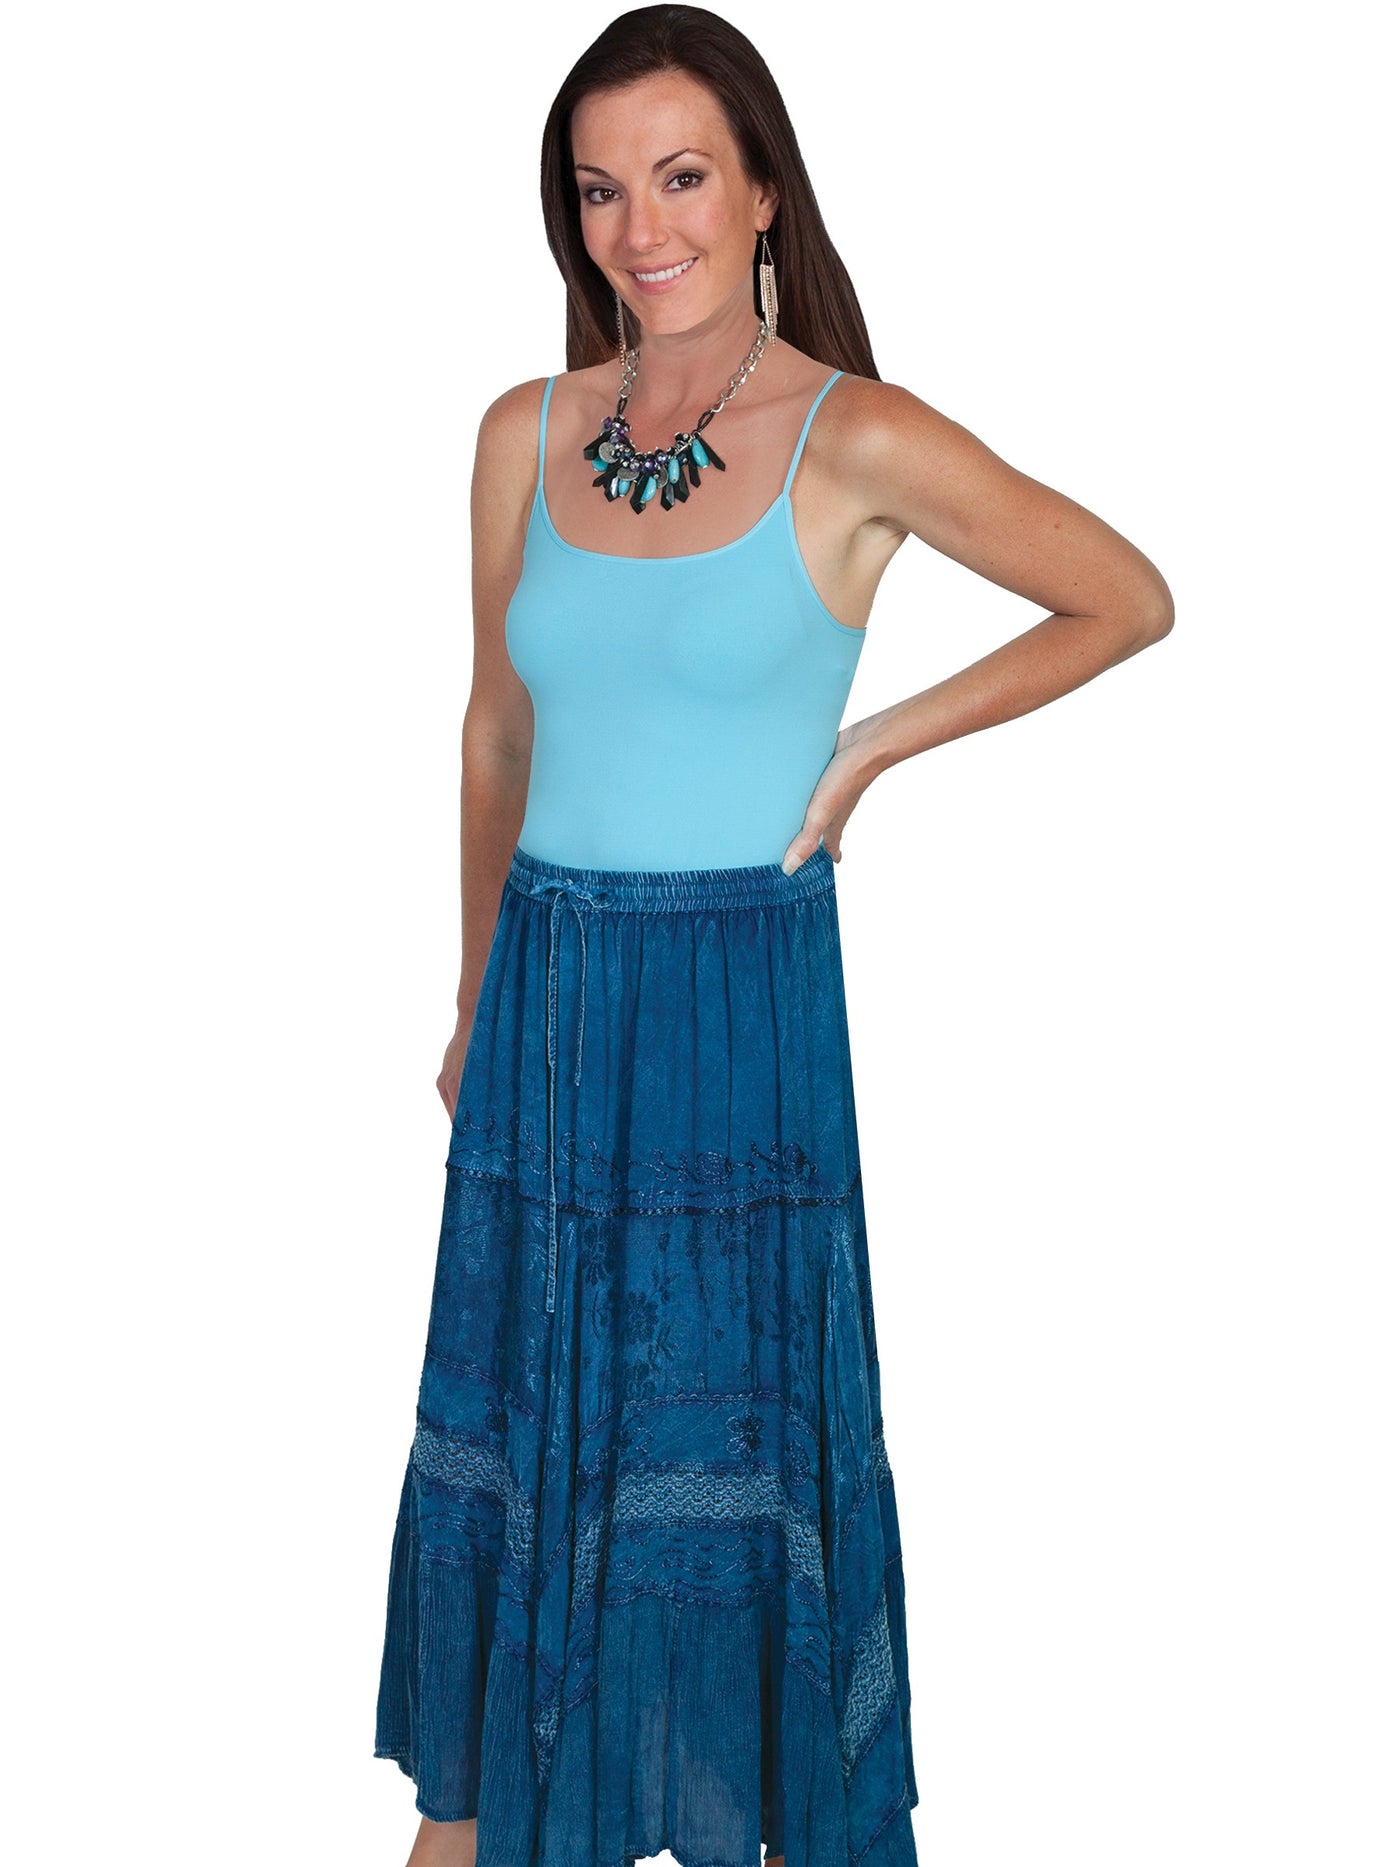 Western Style Full Length Embroidered Skirt in Denim - SOLD OUT